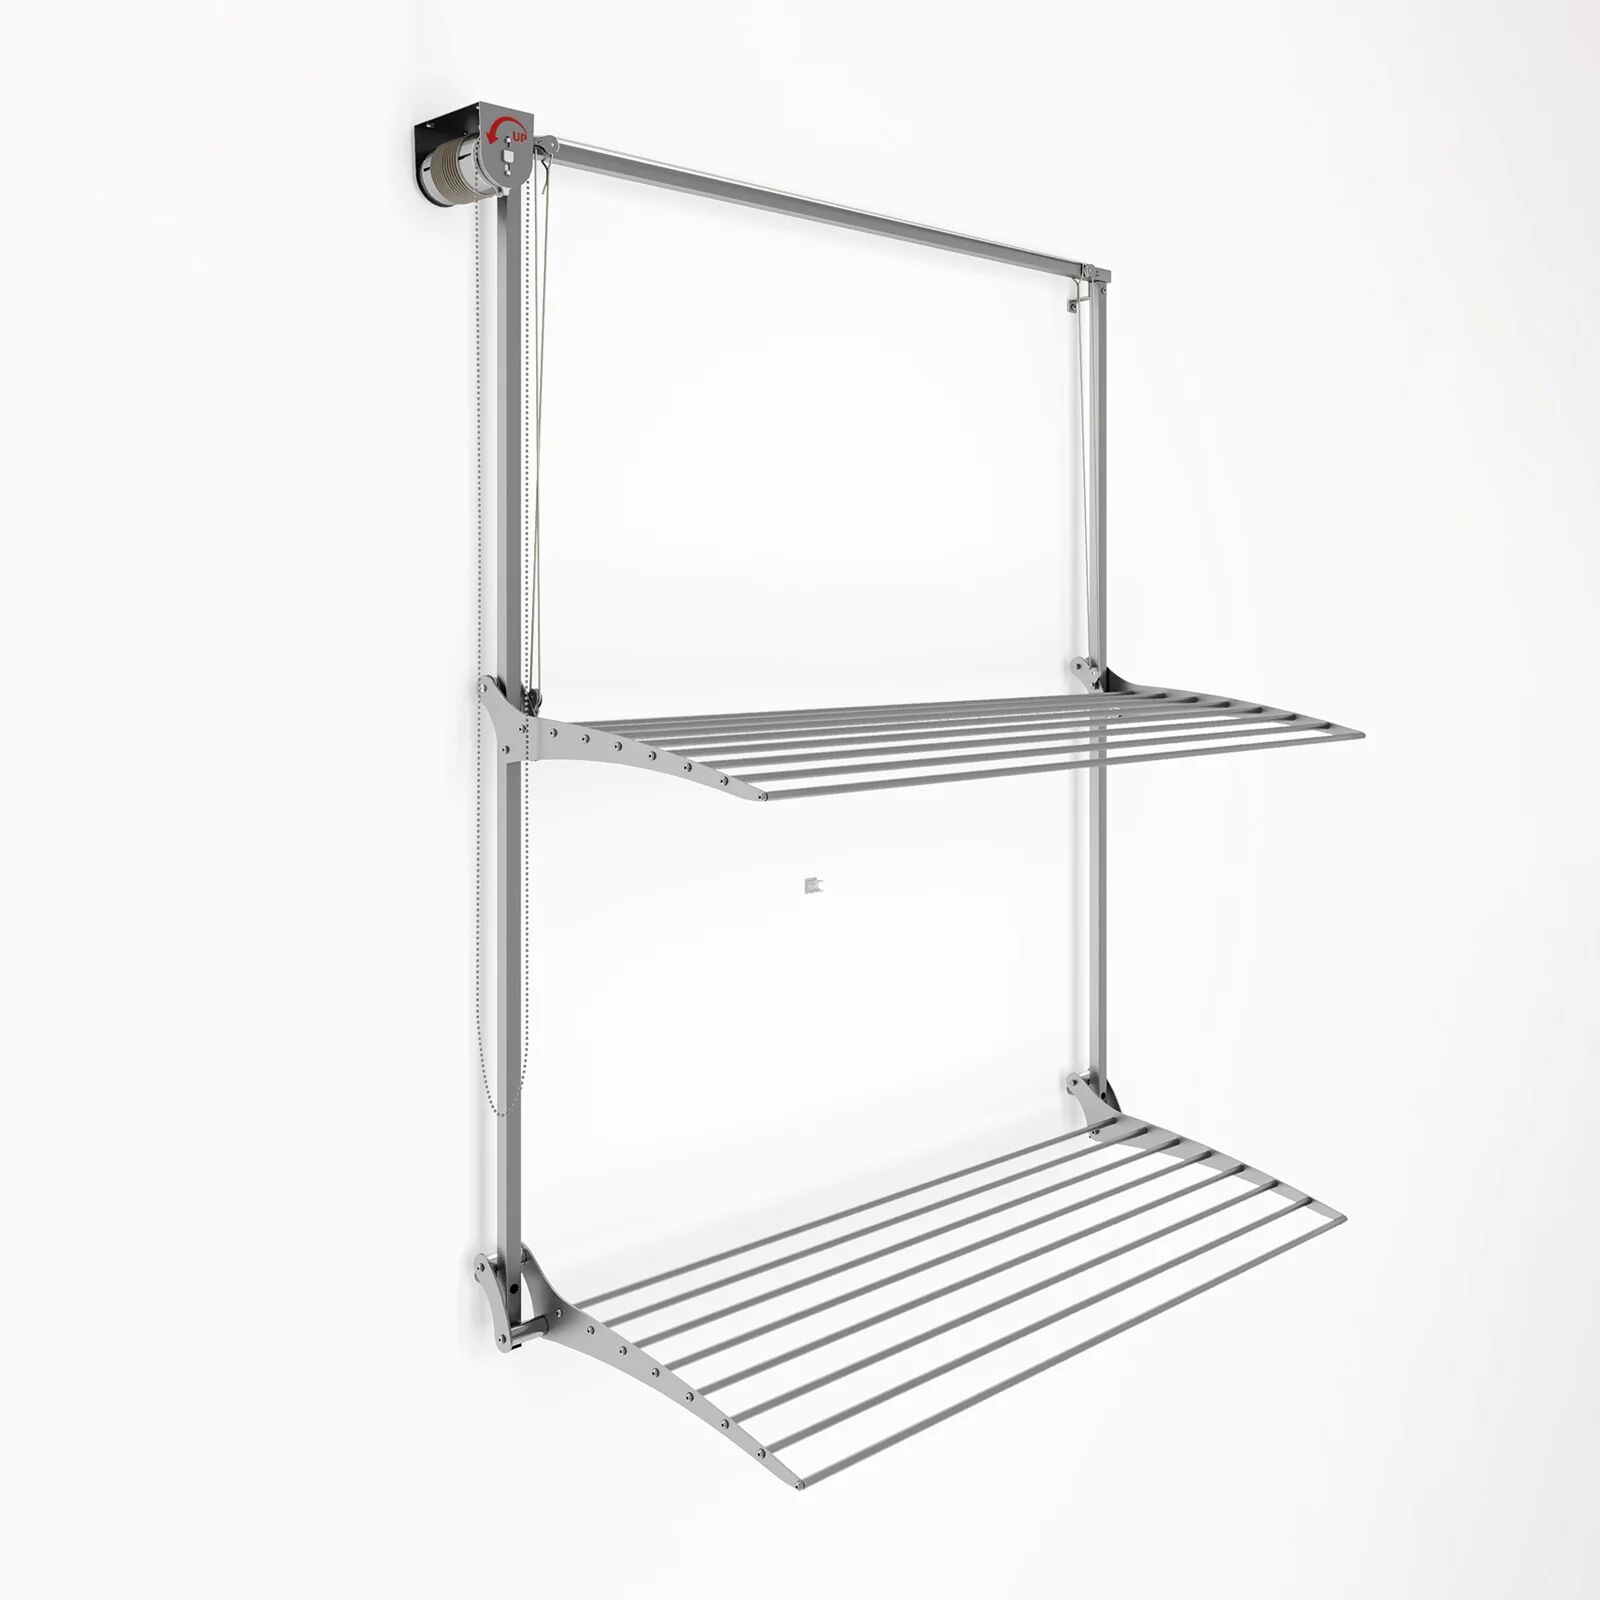 Foxydry Wall Plus 100 wall-mounted space-saving drying rack with two racks